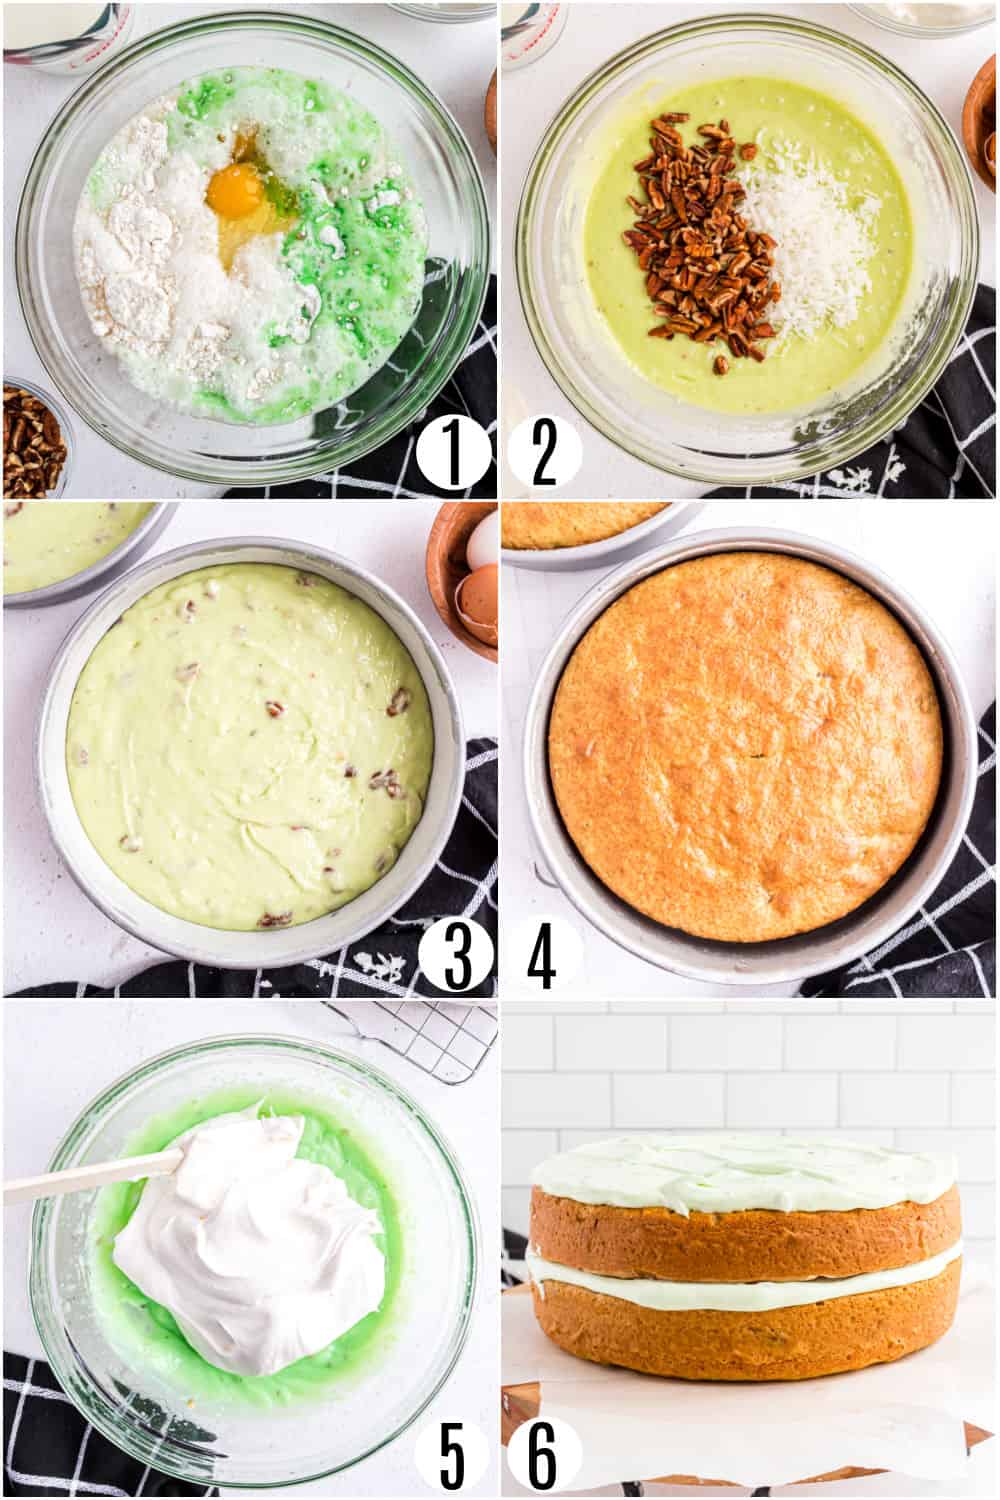 Step by step photos showing how to make watergate cake.